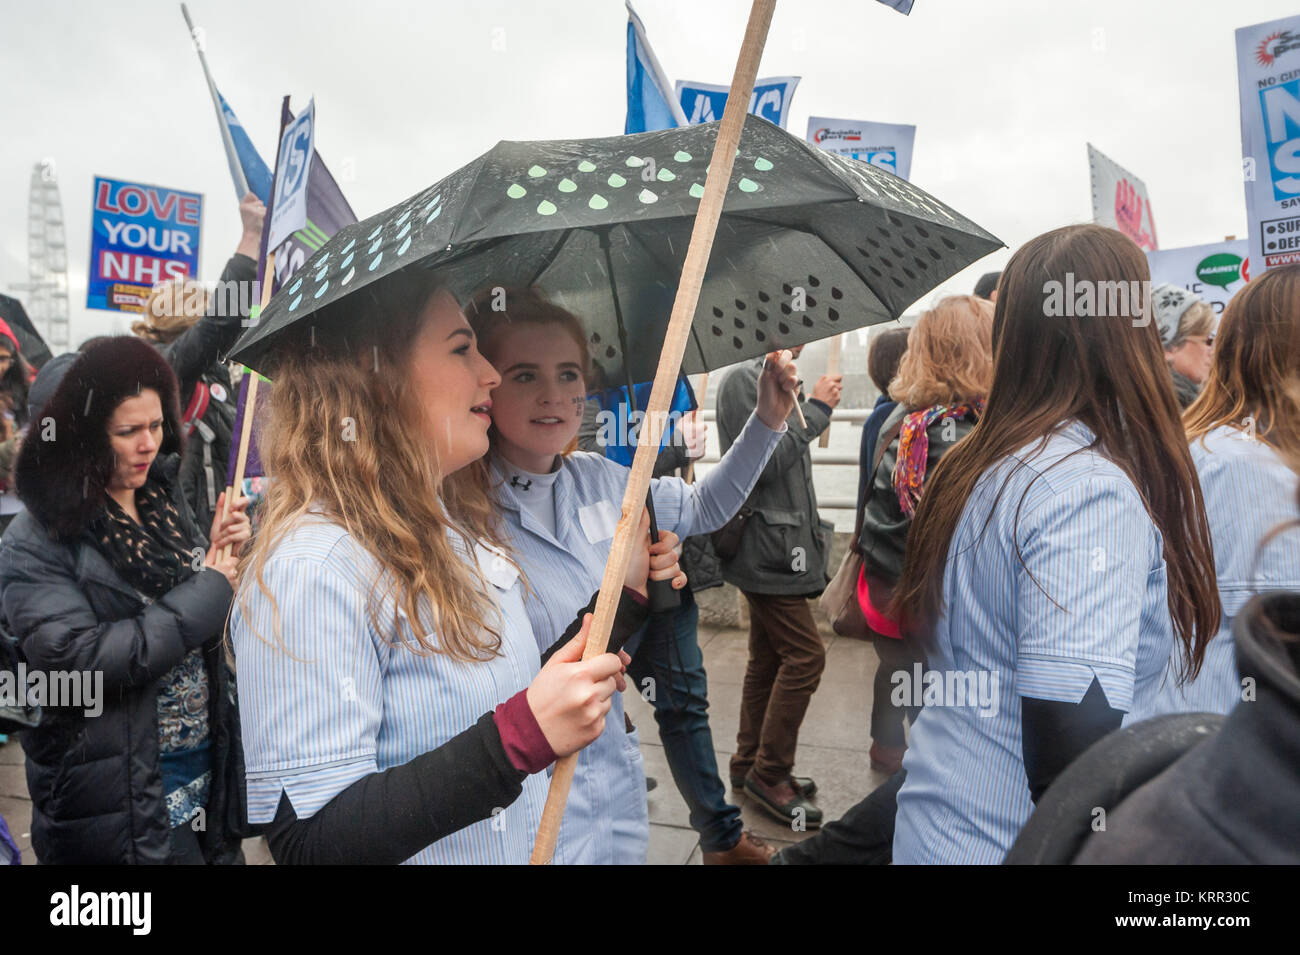 A short heavy shower makes some marchers put up umbrellas on the march to save NHS Student Bursaries. Stock Photo